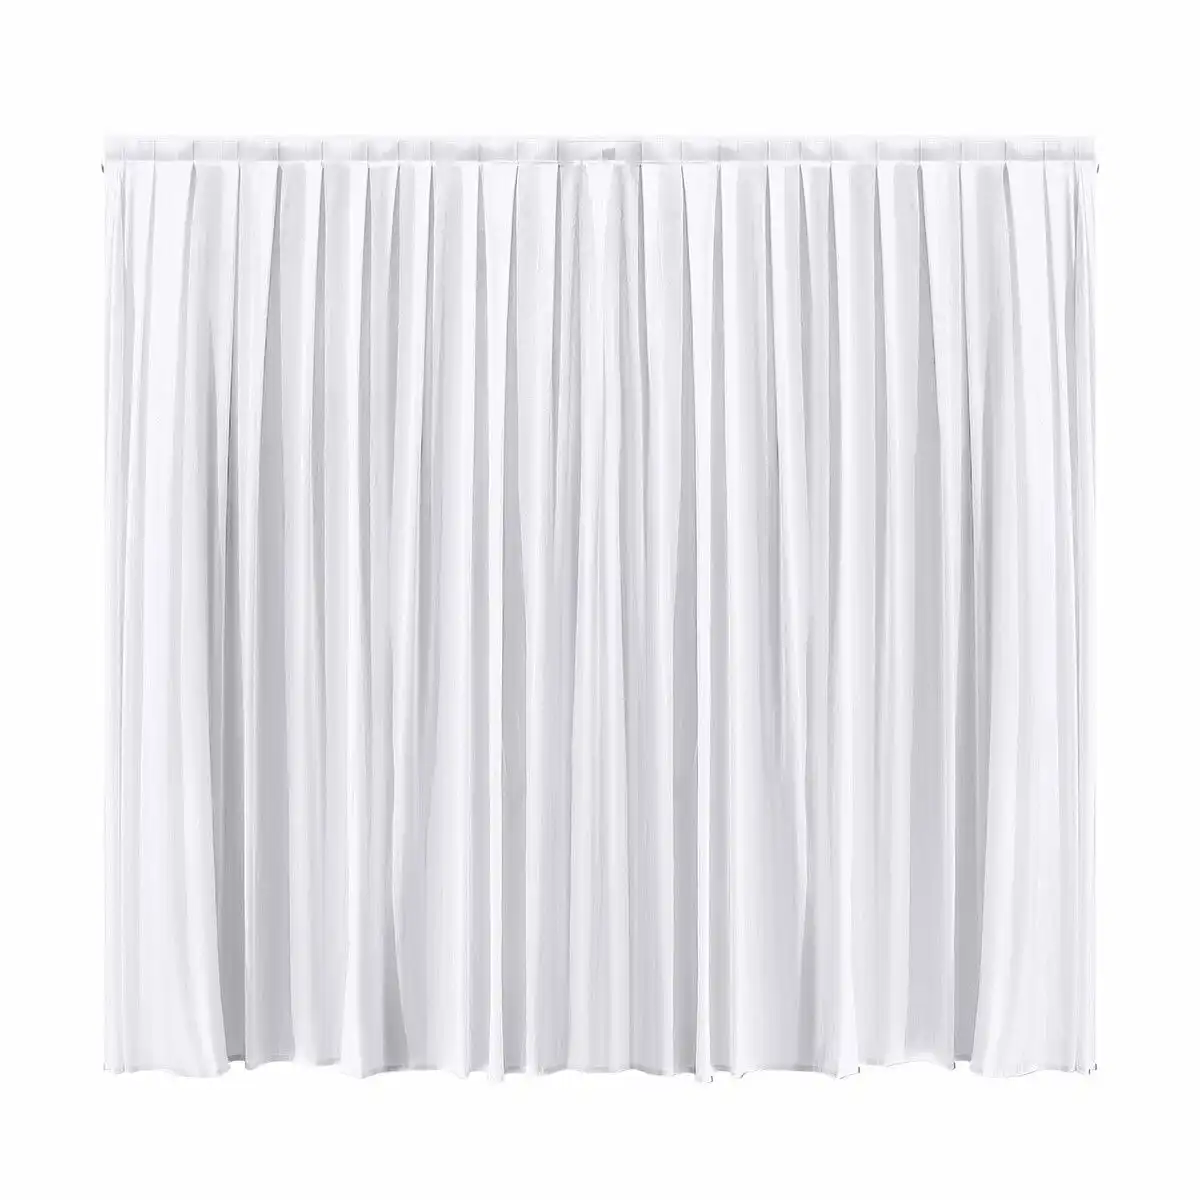 Ausway White Backdrop Curtain Silk Background Drape Wedding Party Birthday Decoration Stage Photography with Rod Pocket 3x3m